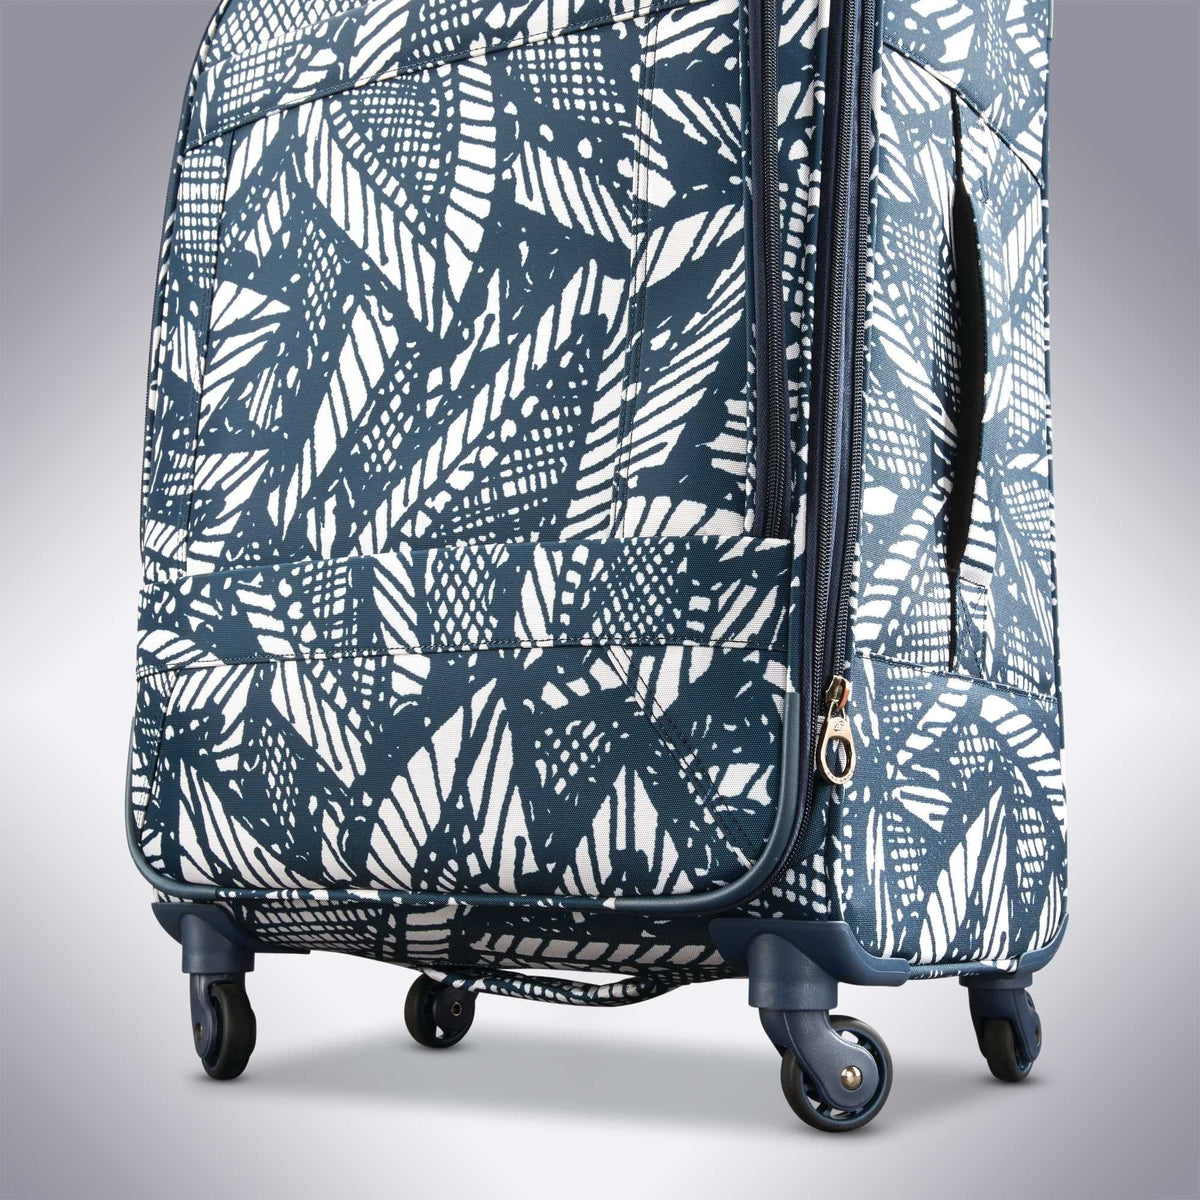 American Tourister Belle Voyage 25" Spinner Luggage